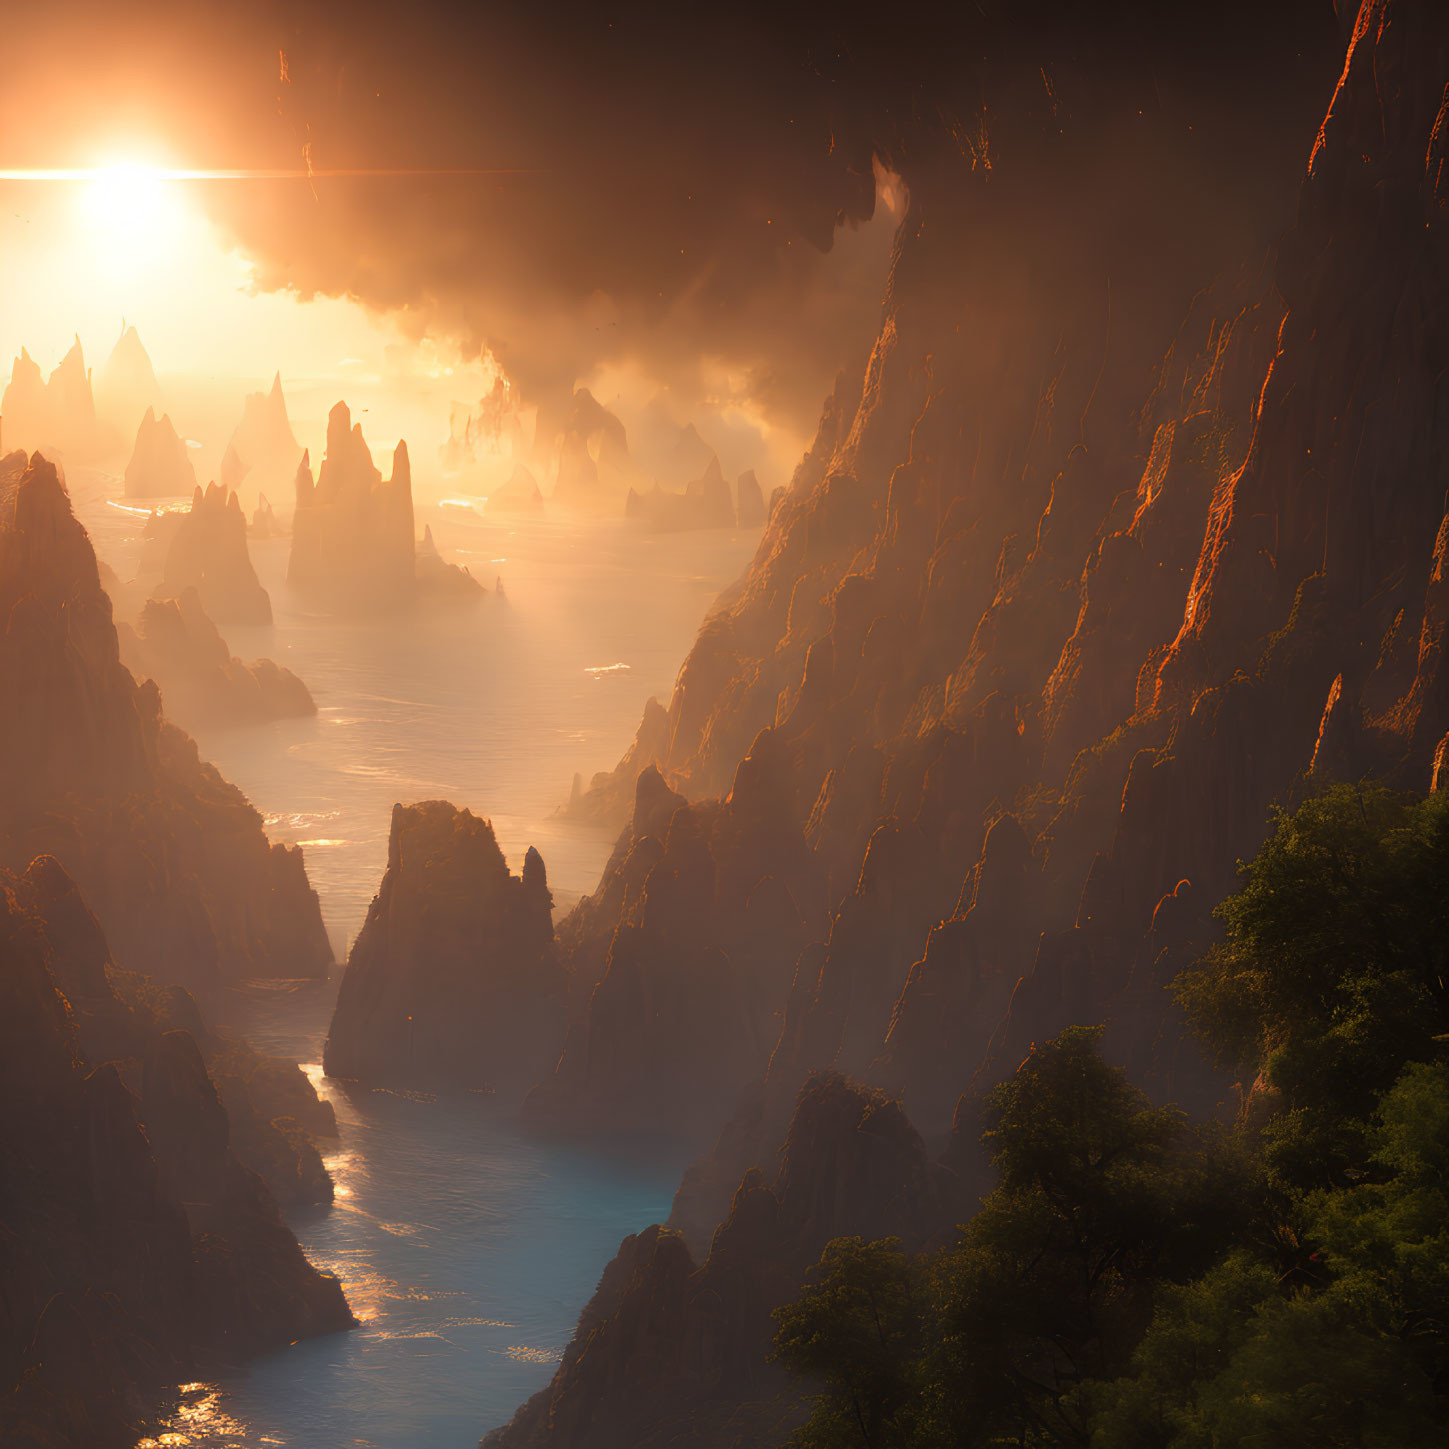 Misty canyon at sunrise with towering cliffs and river.